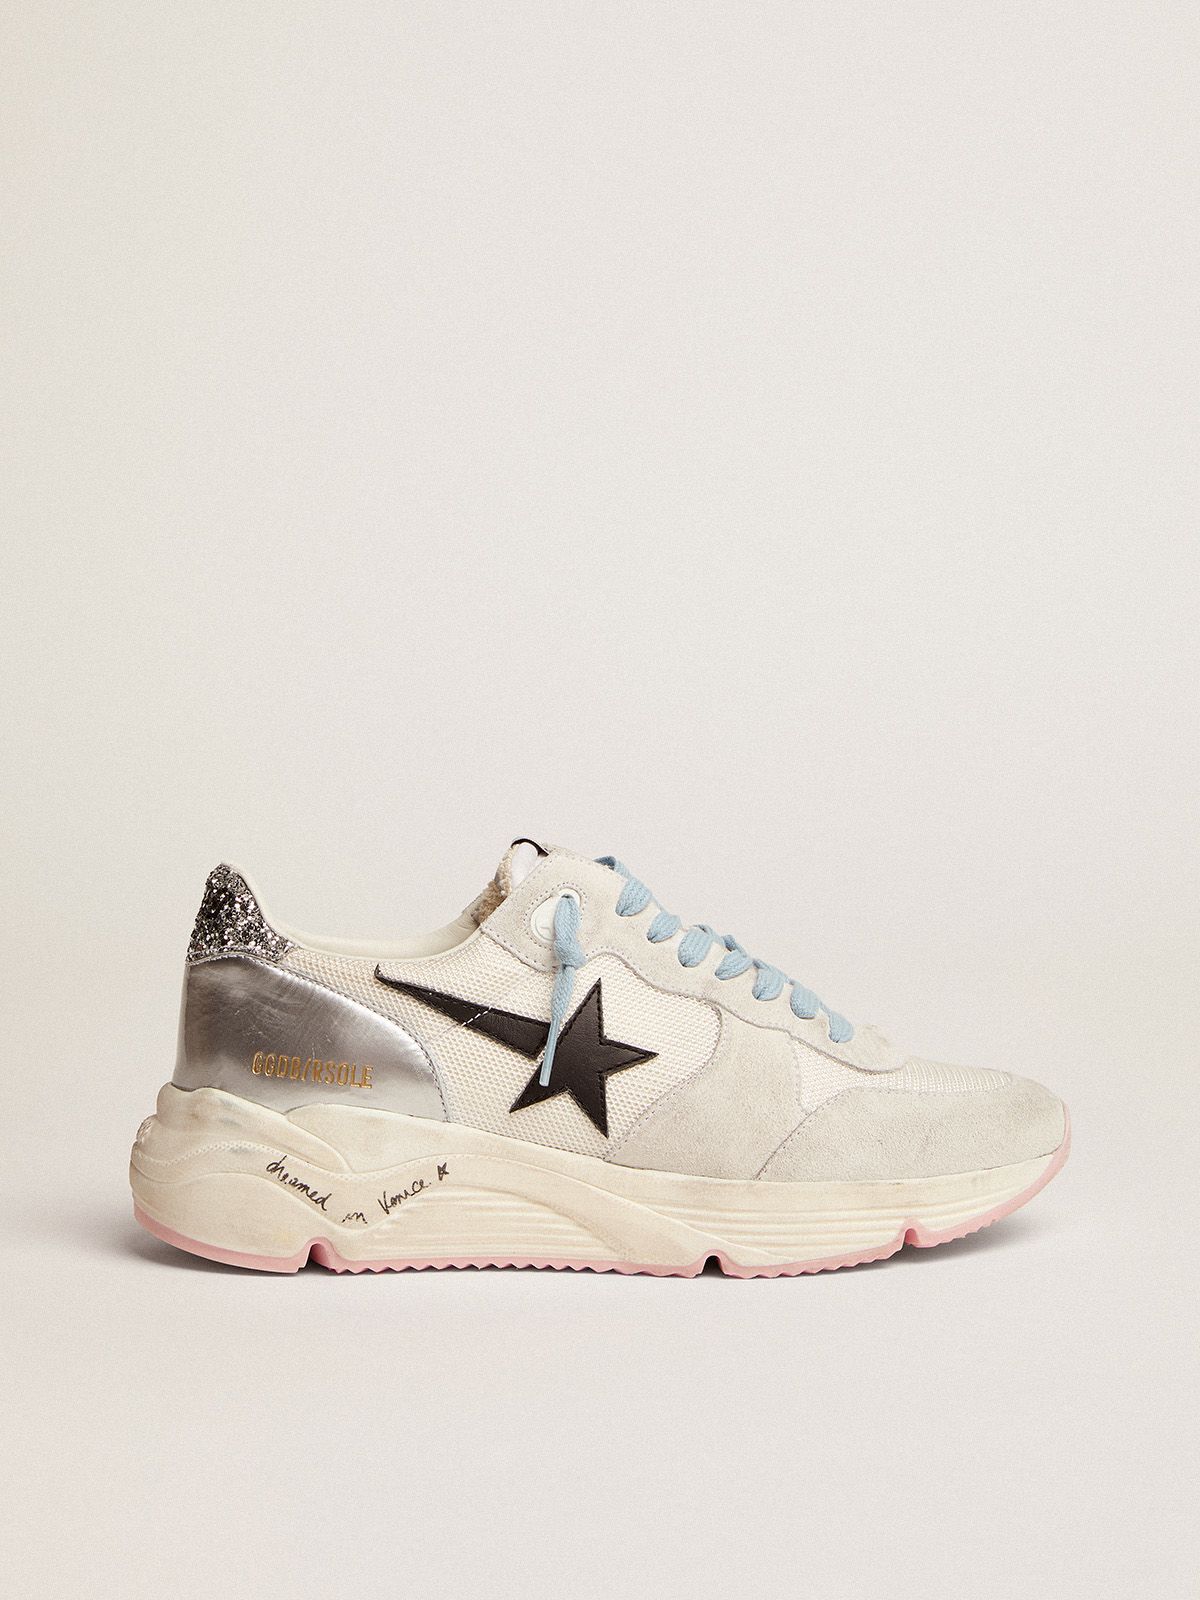 golden goose leather sneakers suede Sole tab LTD in black glitter mesh star and with white heel Running silver